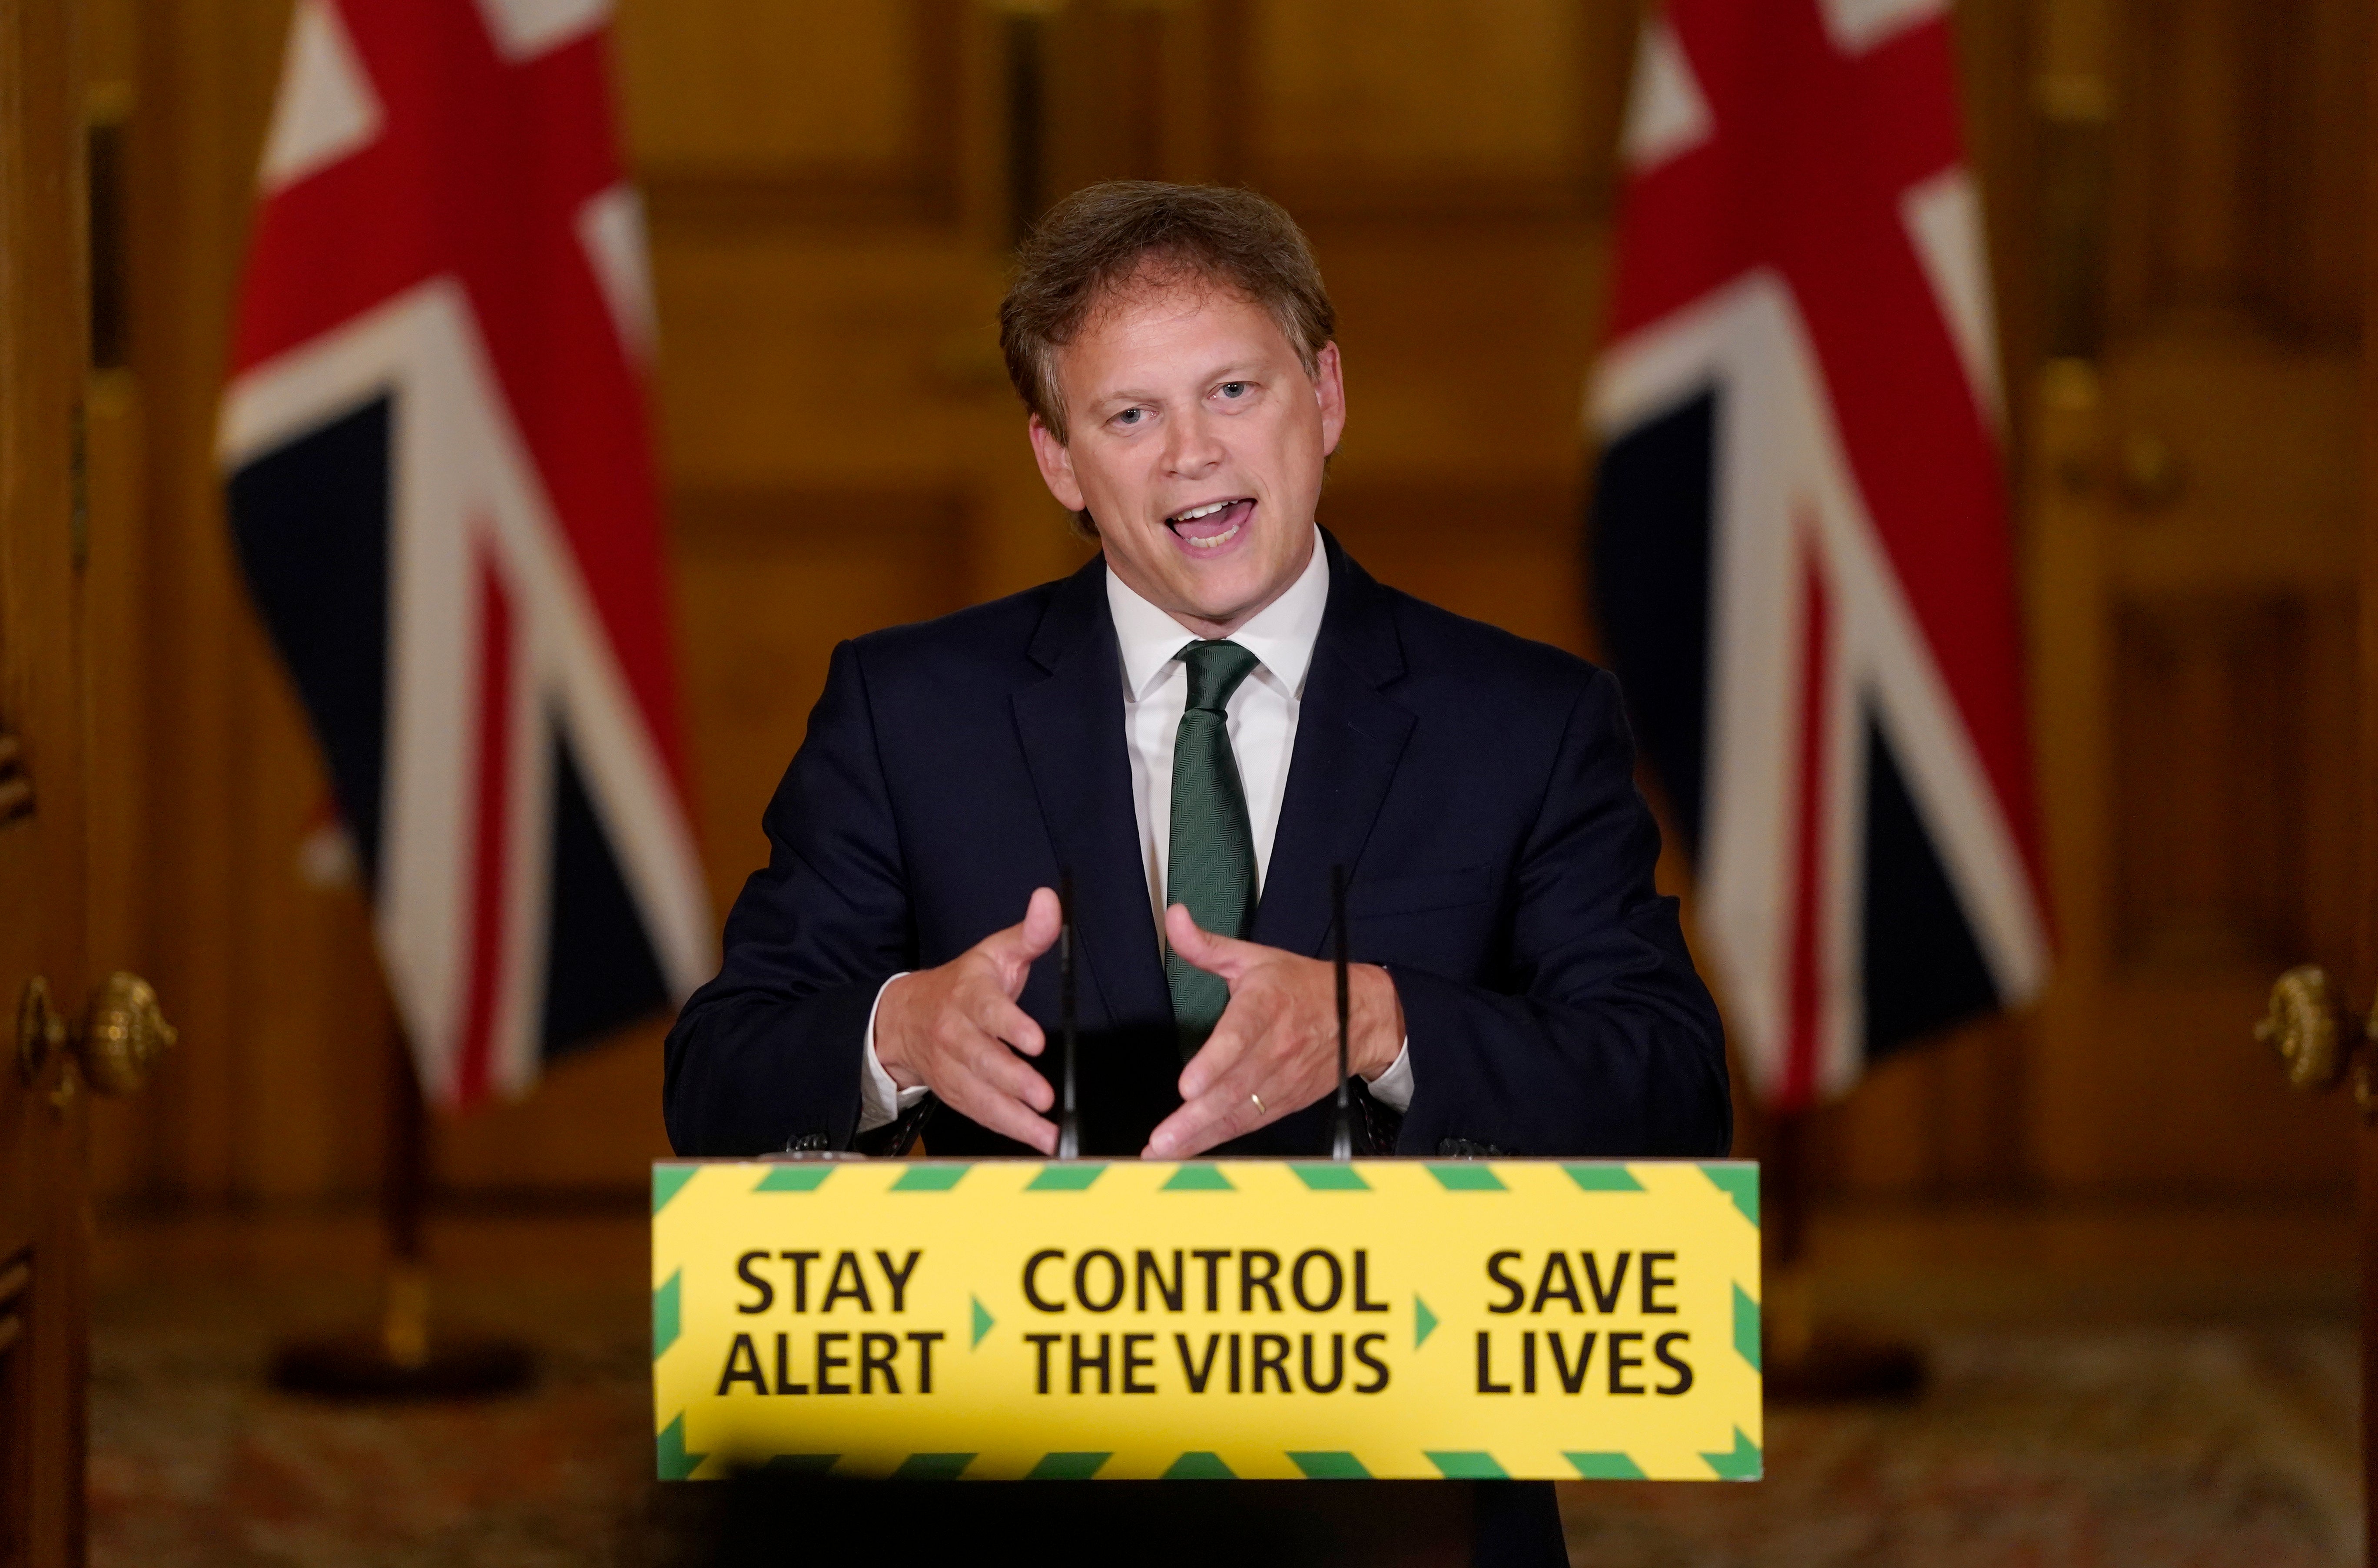 Grant Shapps was transport secretary during the pandemic (Andrew Parsons/10 Downing Street/Crown Copyright/PA)